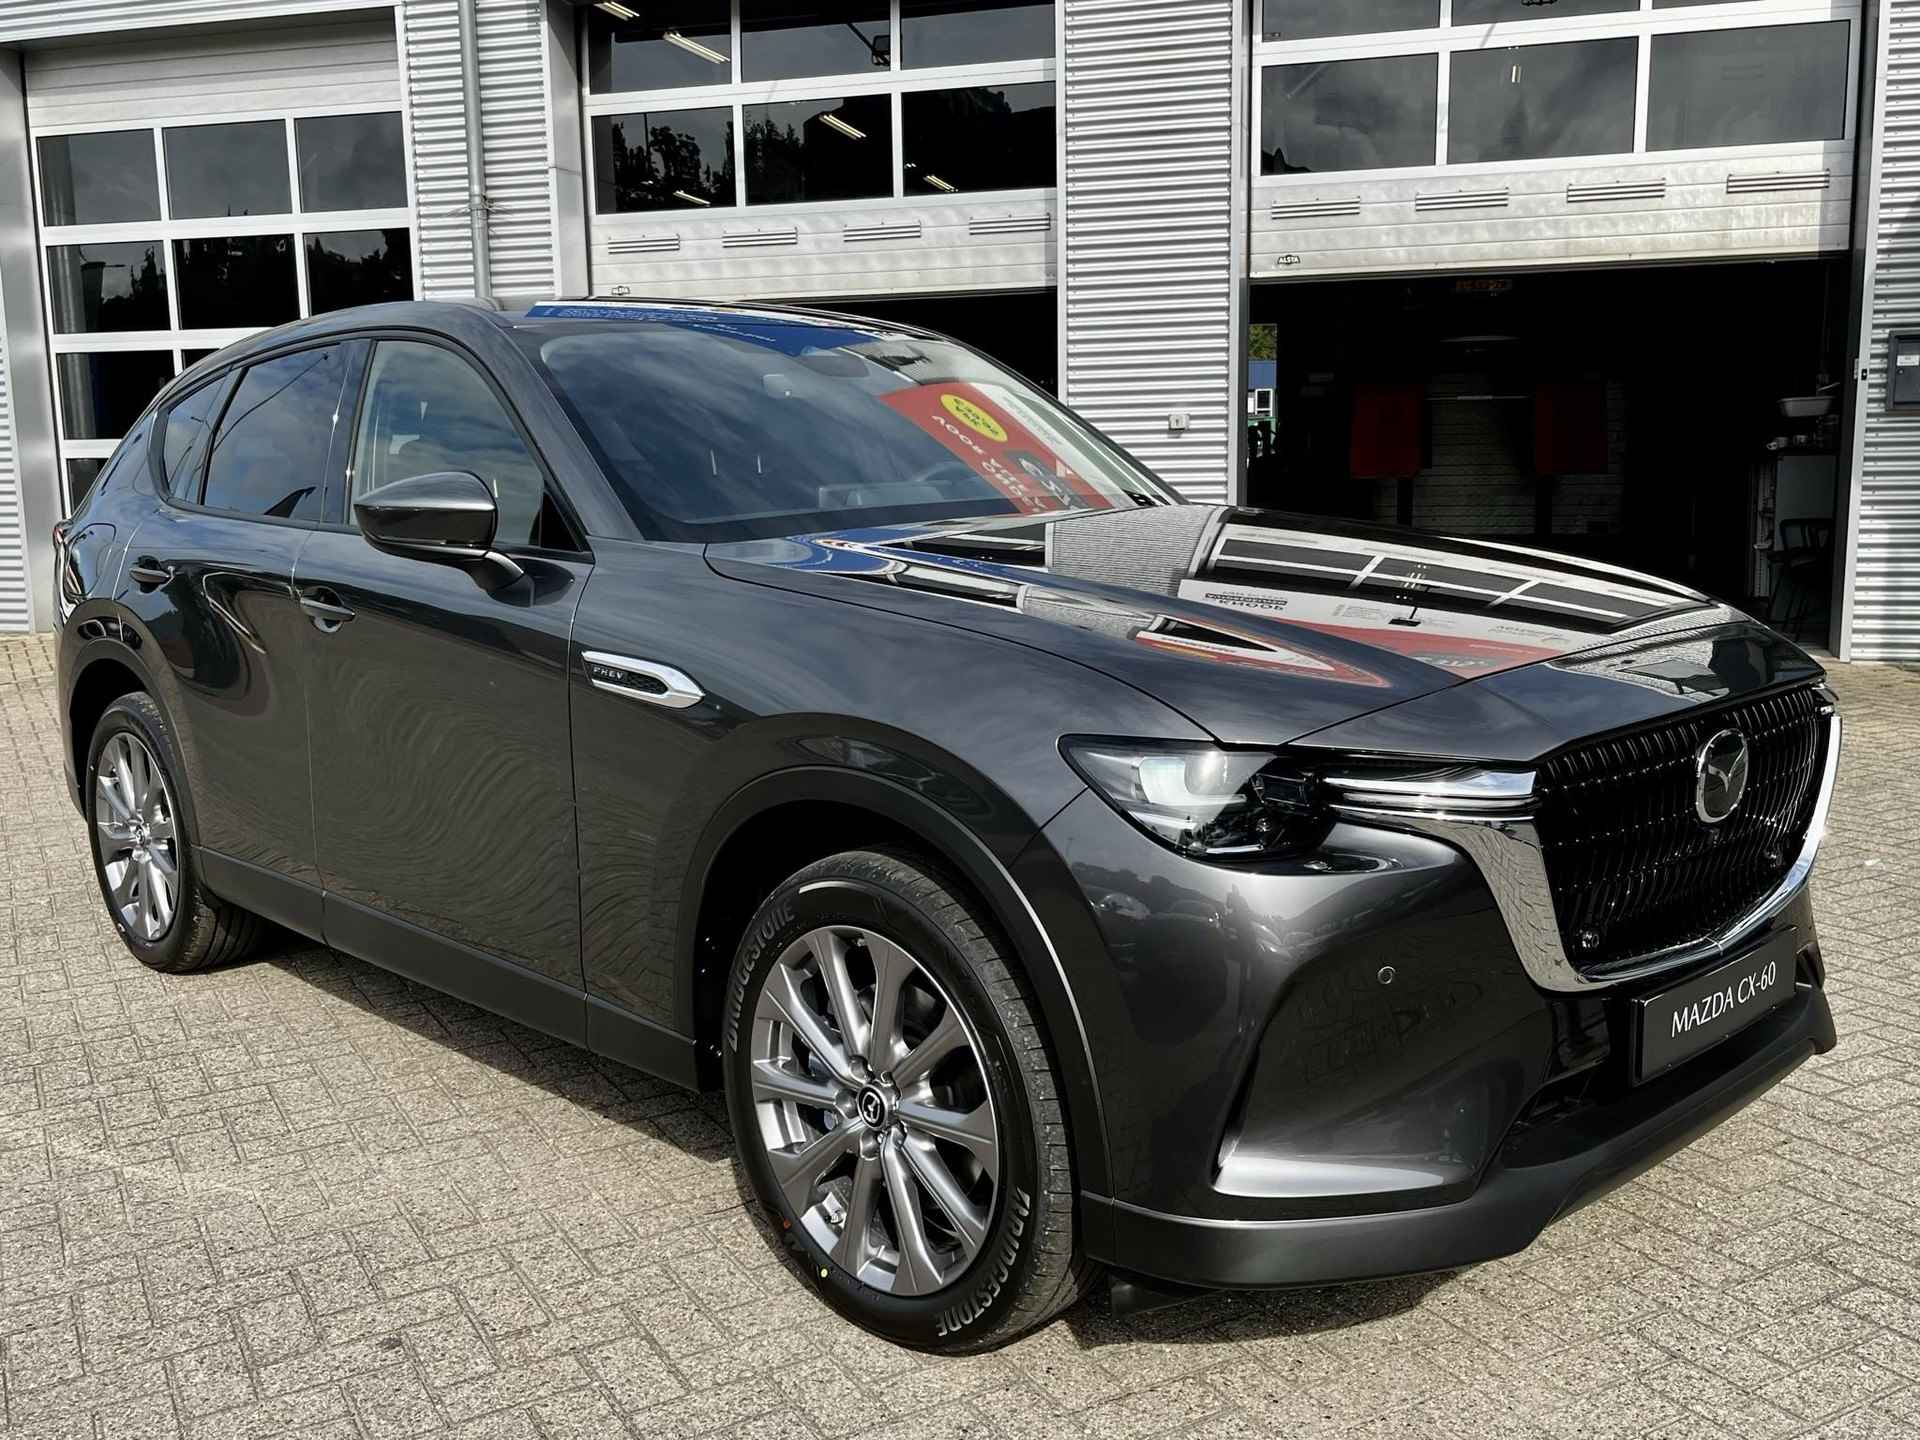 Mazda CX-60 2.5 e-SkyActiv PHEV Exclusive-Line + Convenience & Sound pack + Driver Assistance Pack - 8/43